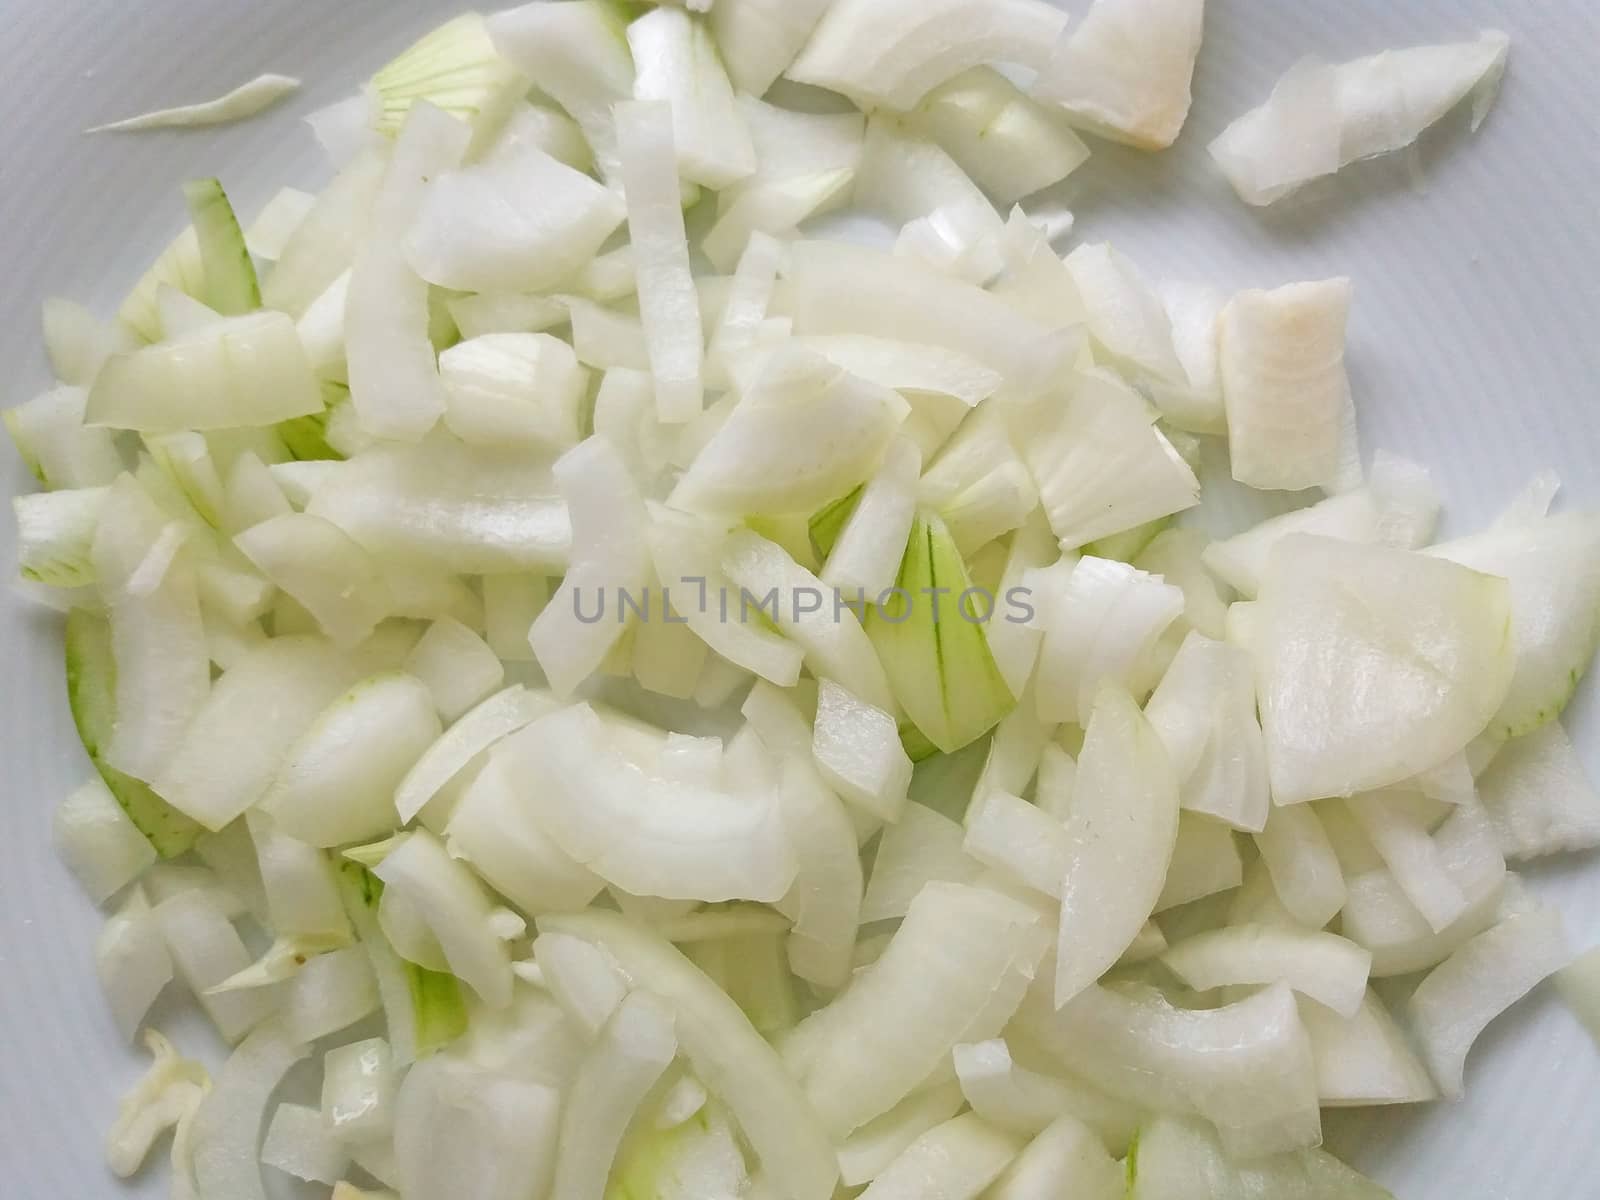 white Onion sliced, and ready to use